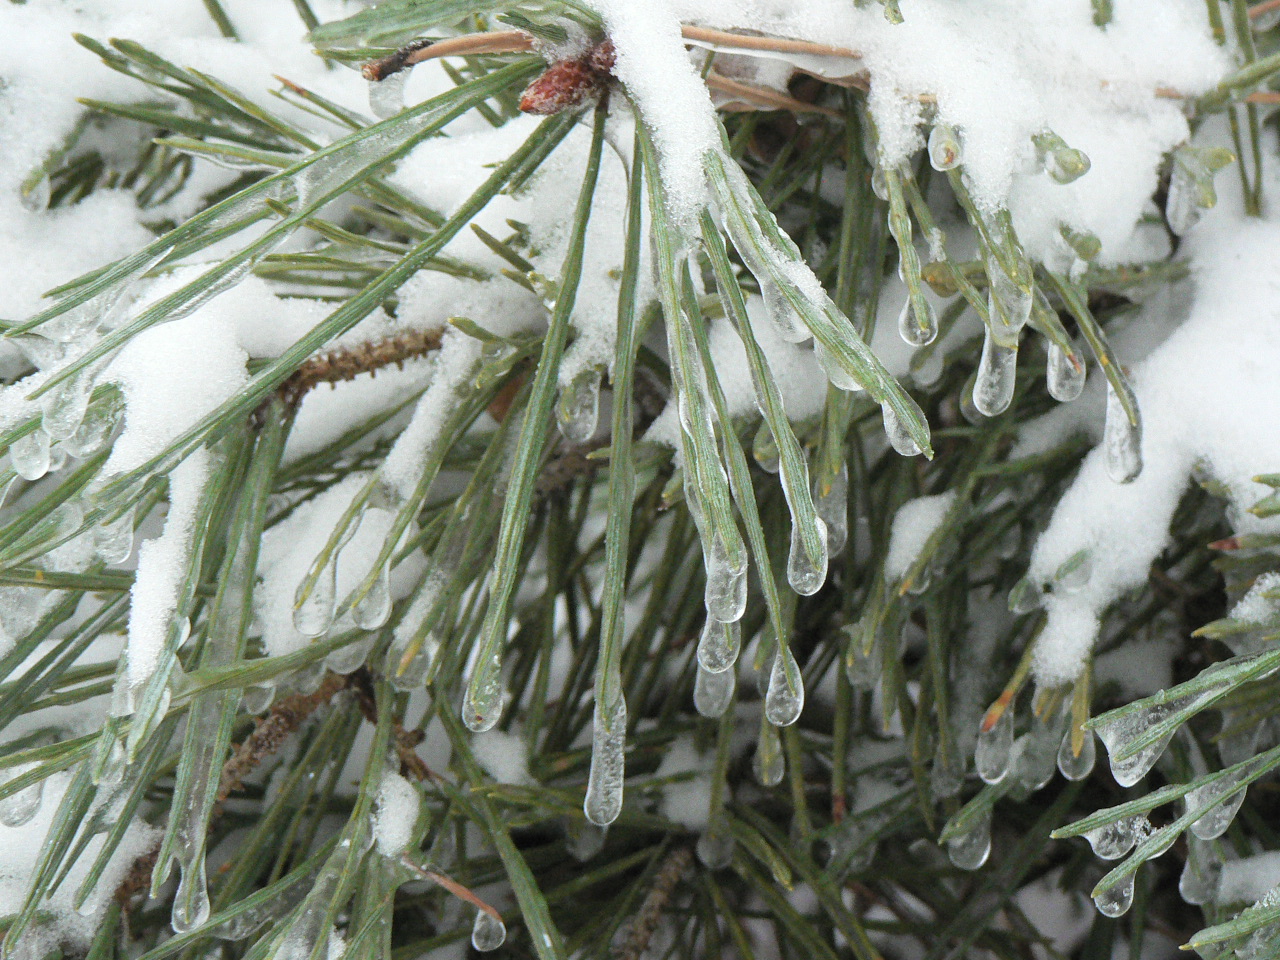 Evergreen branches used to cover flower beds against frost in